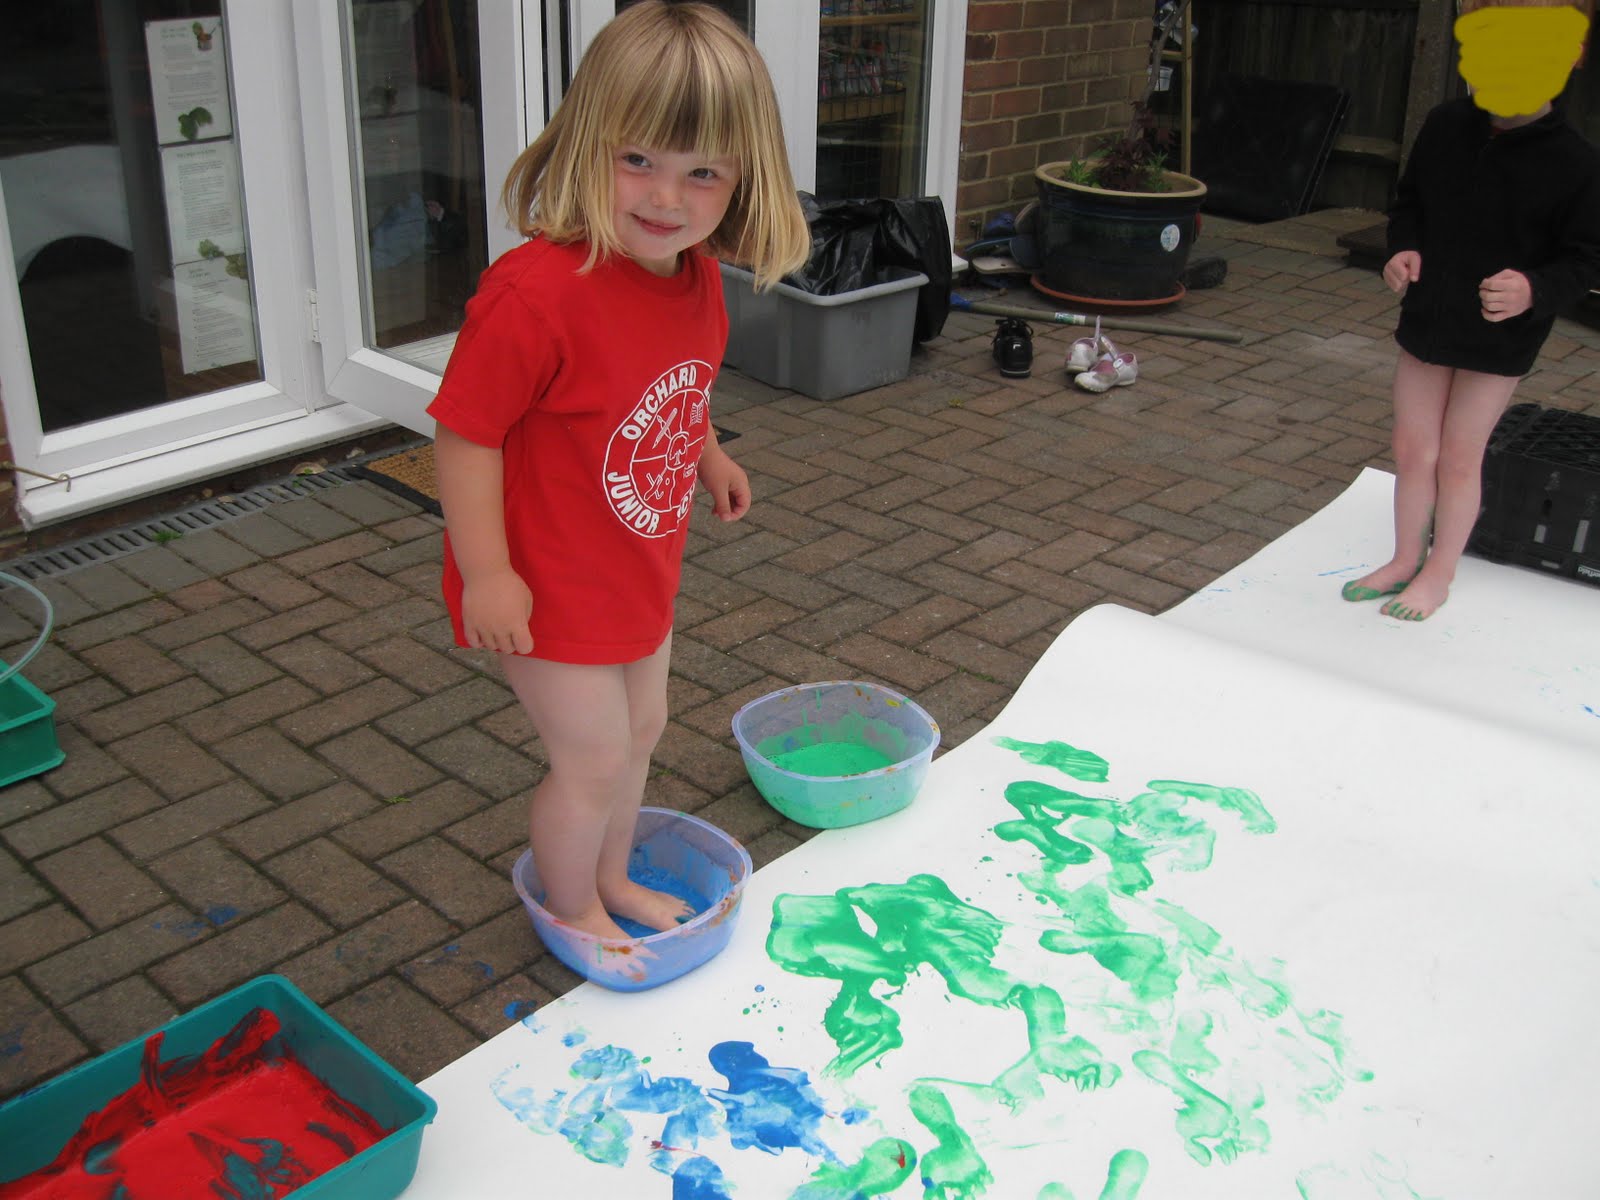 Painting and Exploring Art - Rainy day indoor activities for kids